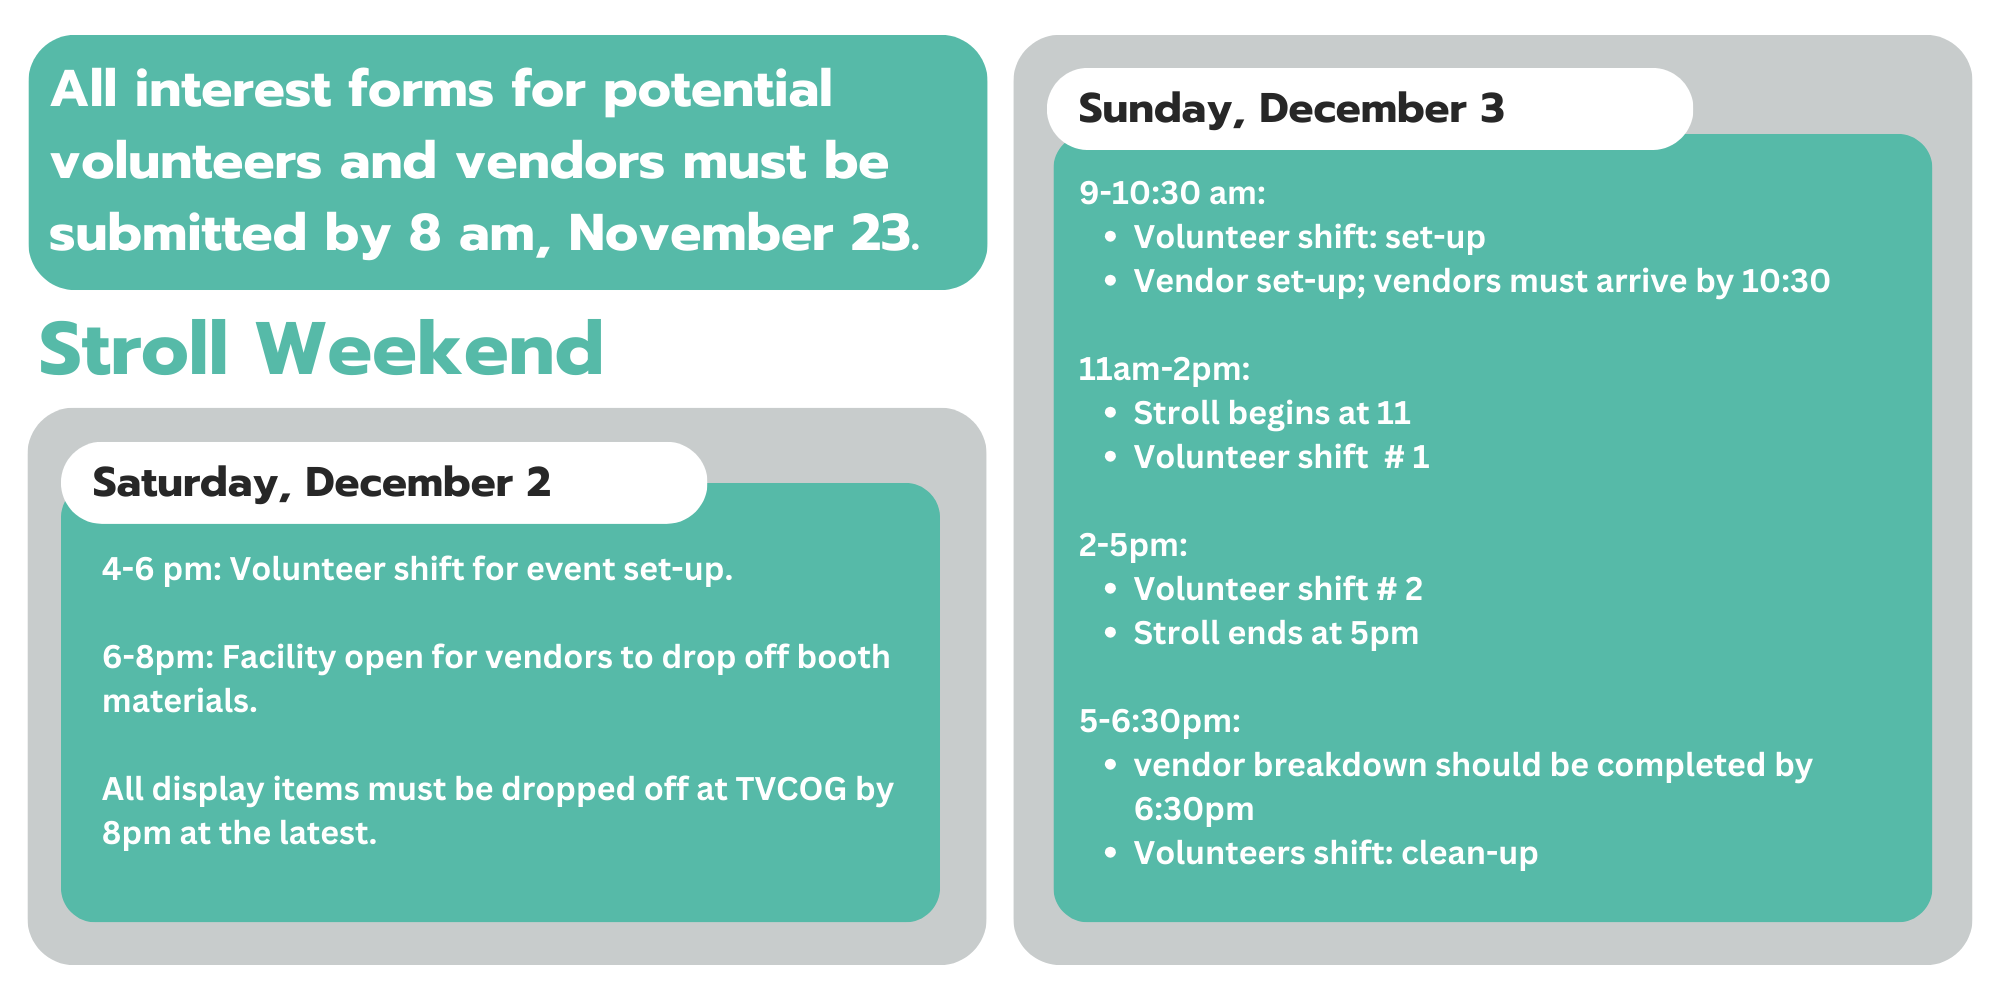 Victorian_Stroll_Schedule_Info_for_Vendors__Volunteers-_Web_Graphic.png - 216.76 kB